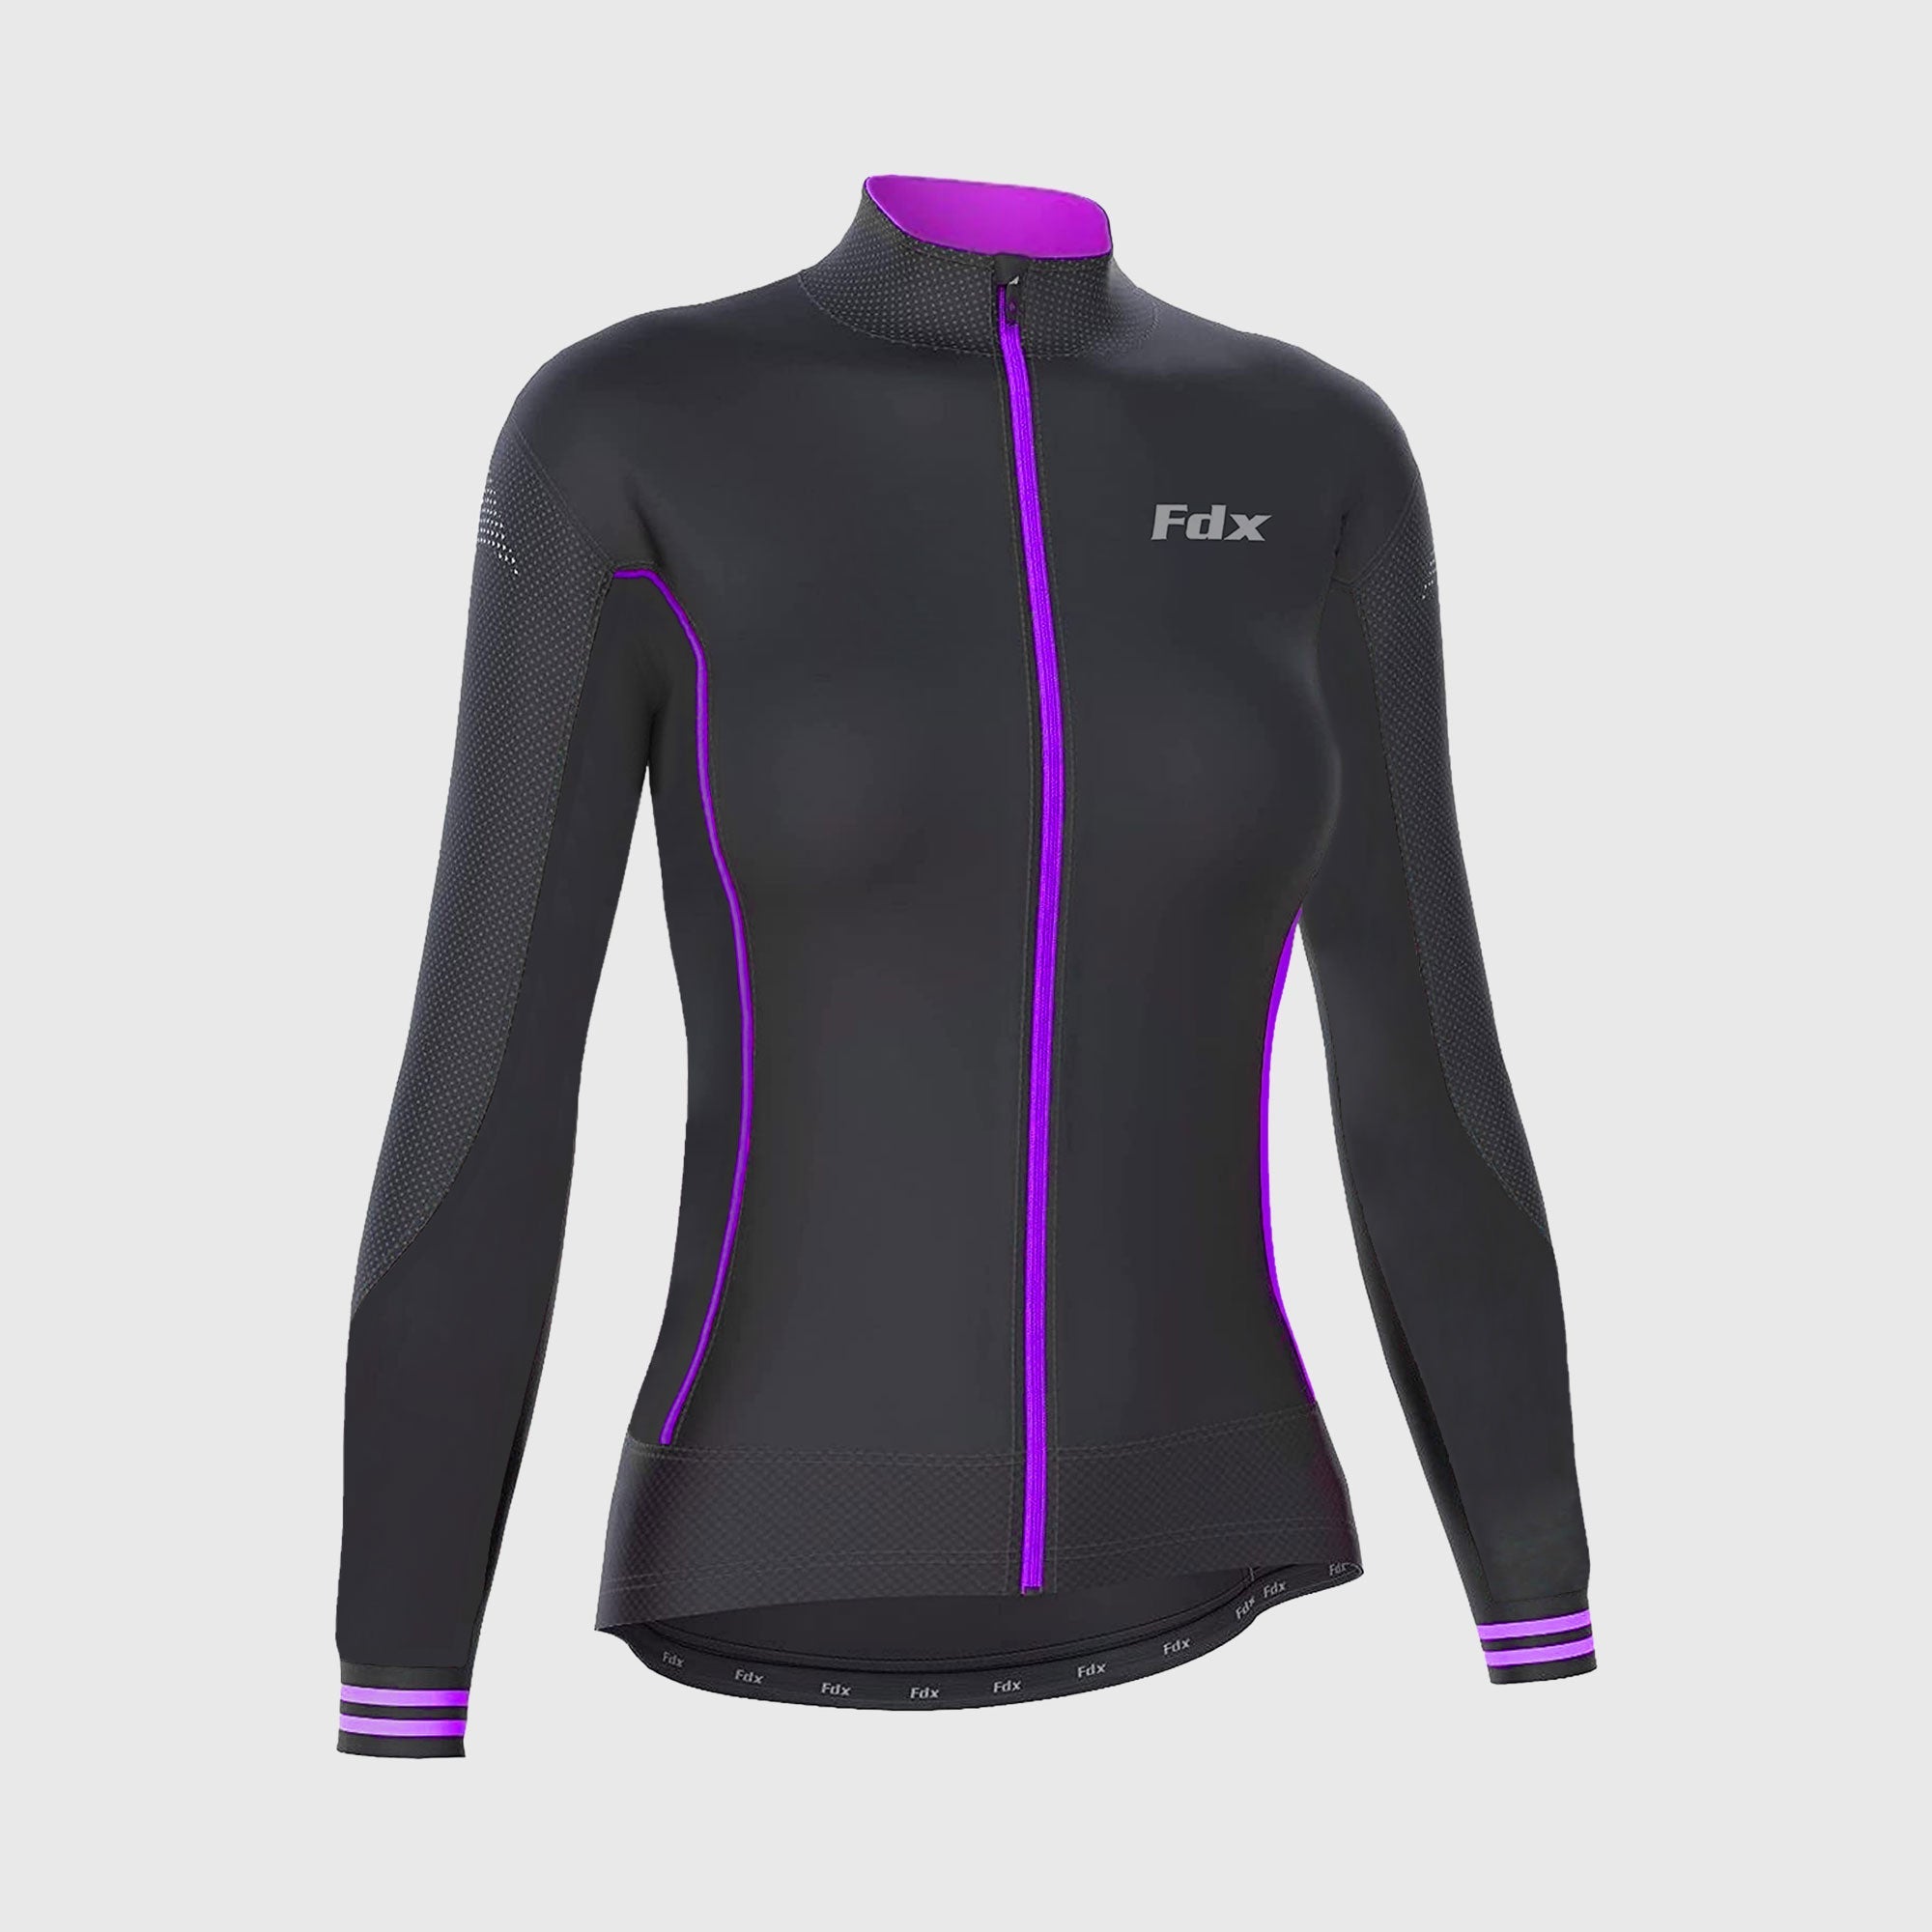 Related: Blue Women 3 Cycling Top